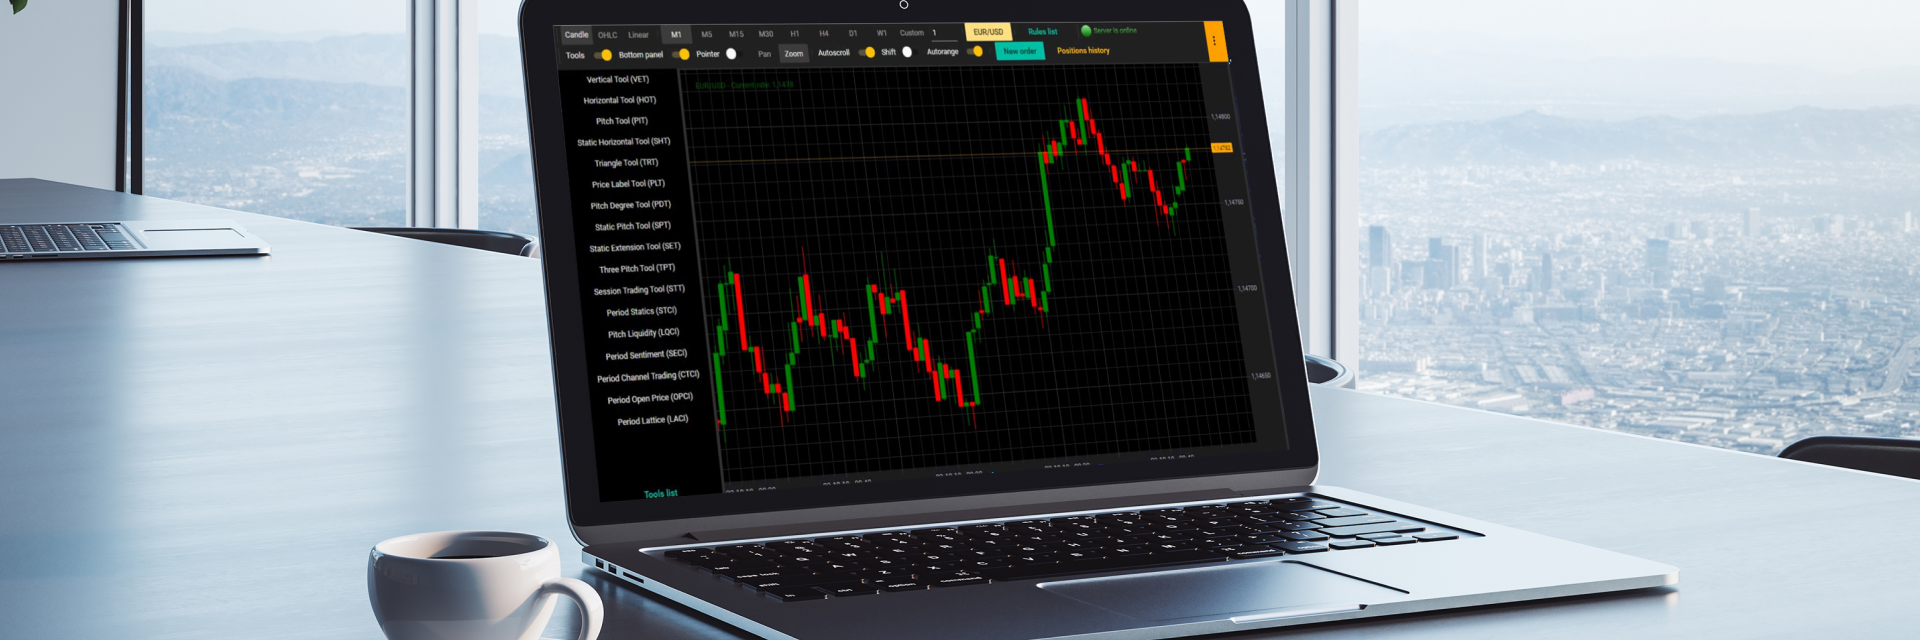 Automated trading application